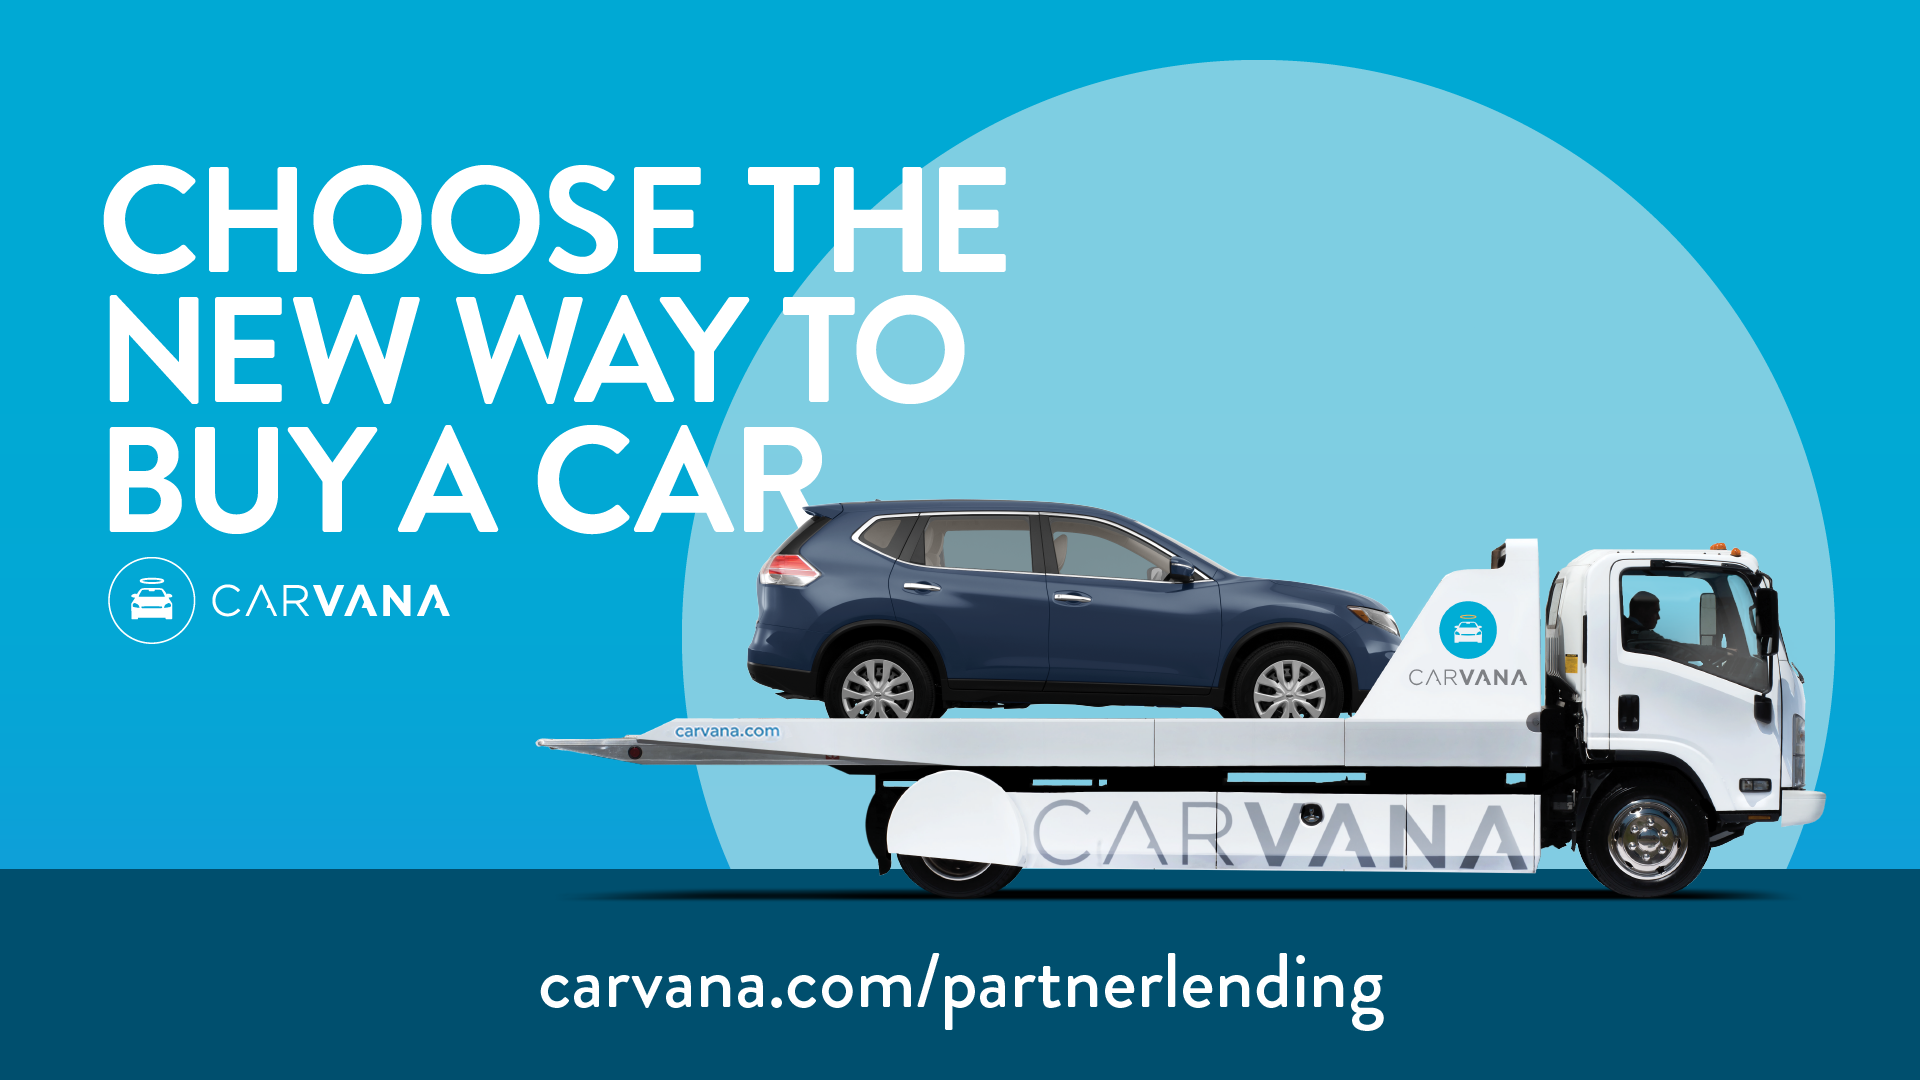 Choose the New Way to Buy a Car-carvana.com/partnerlending - SUV on a Carvana delivery truck.